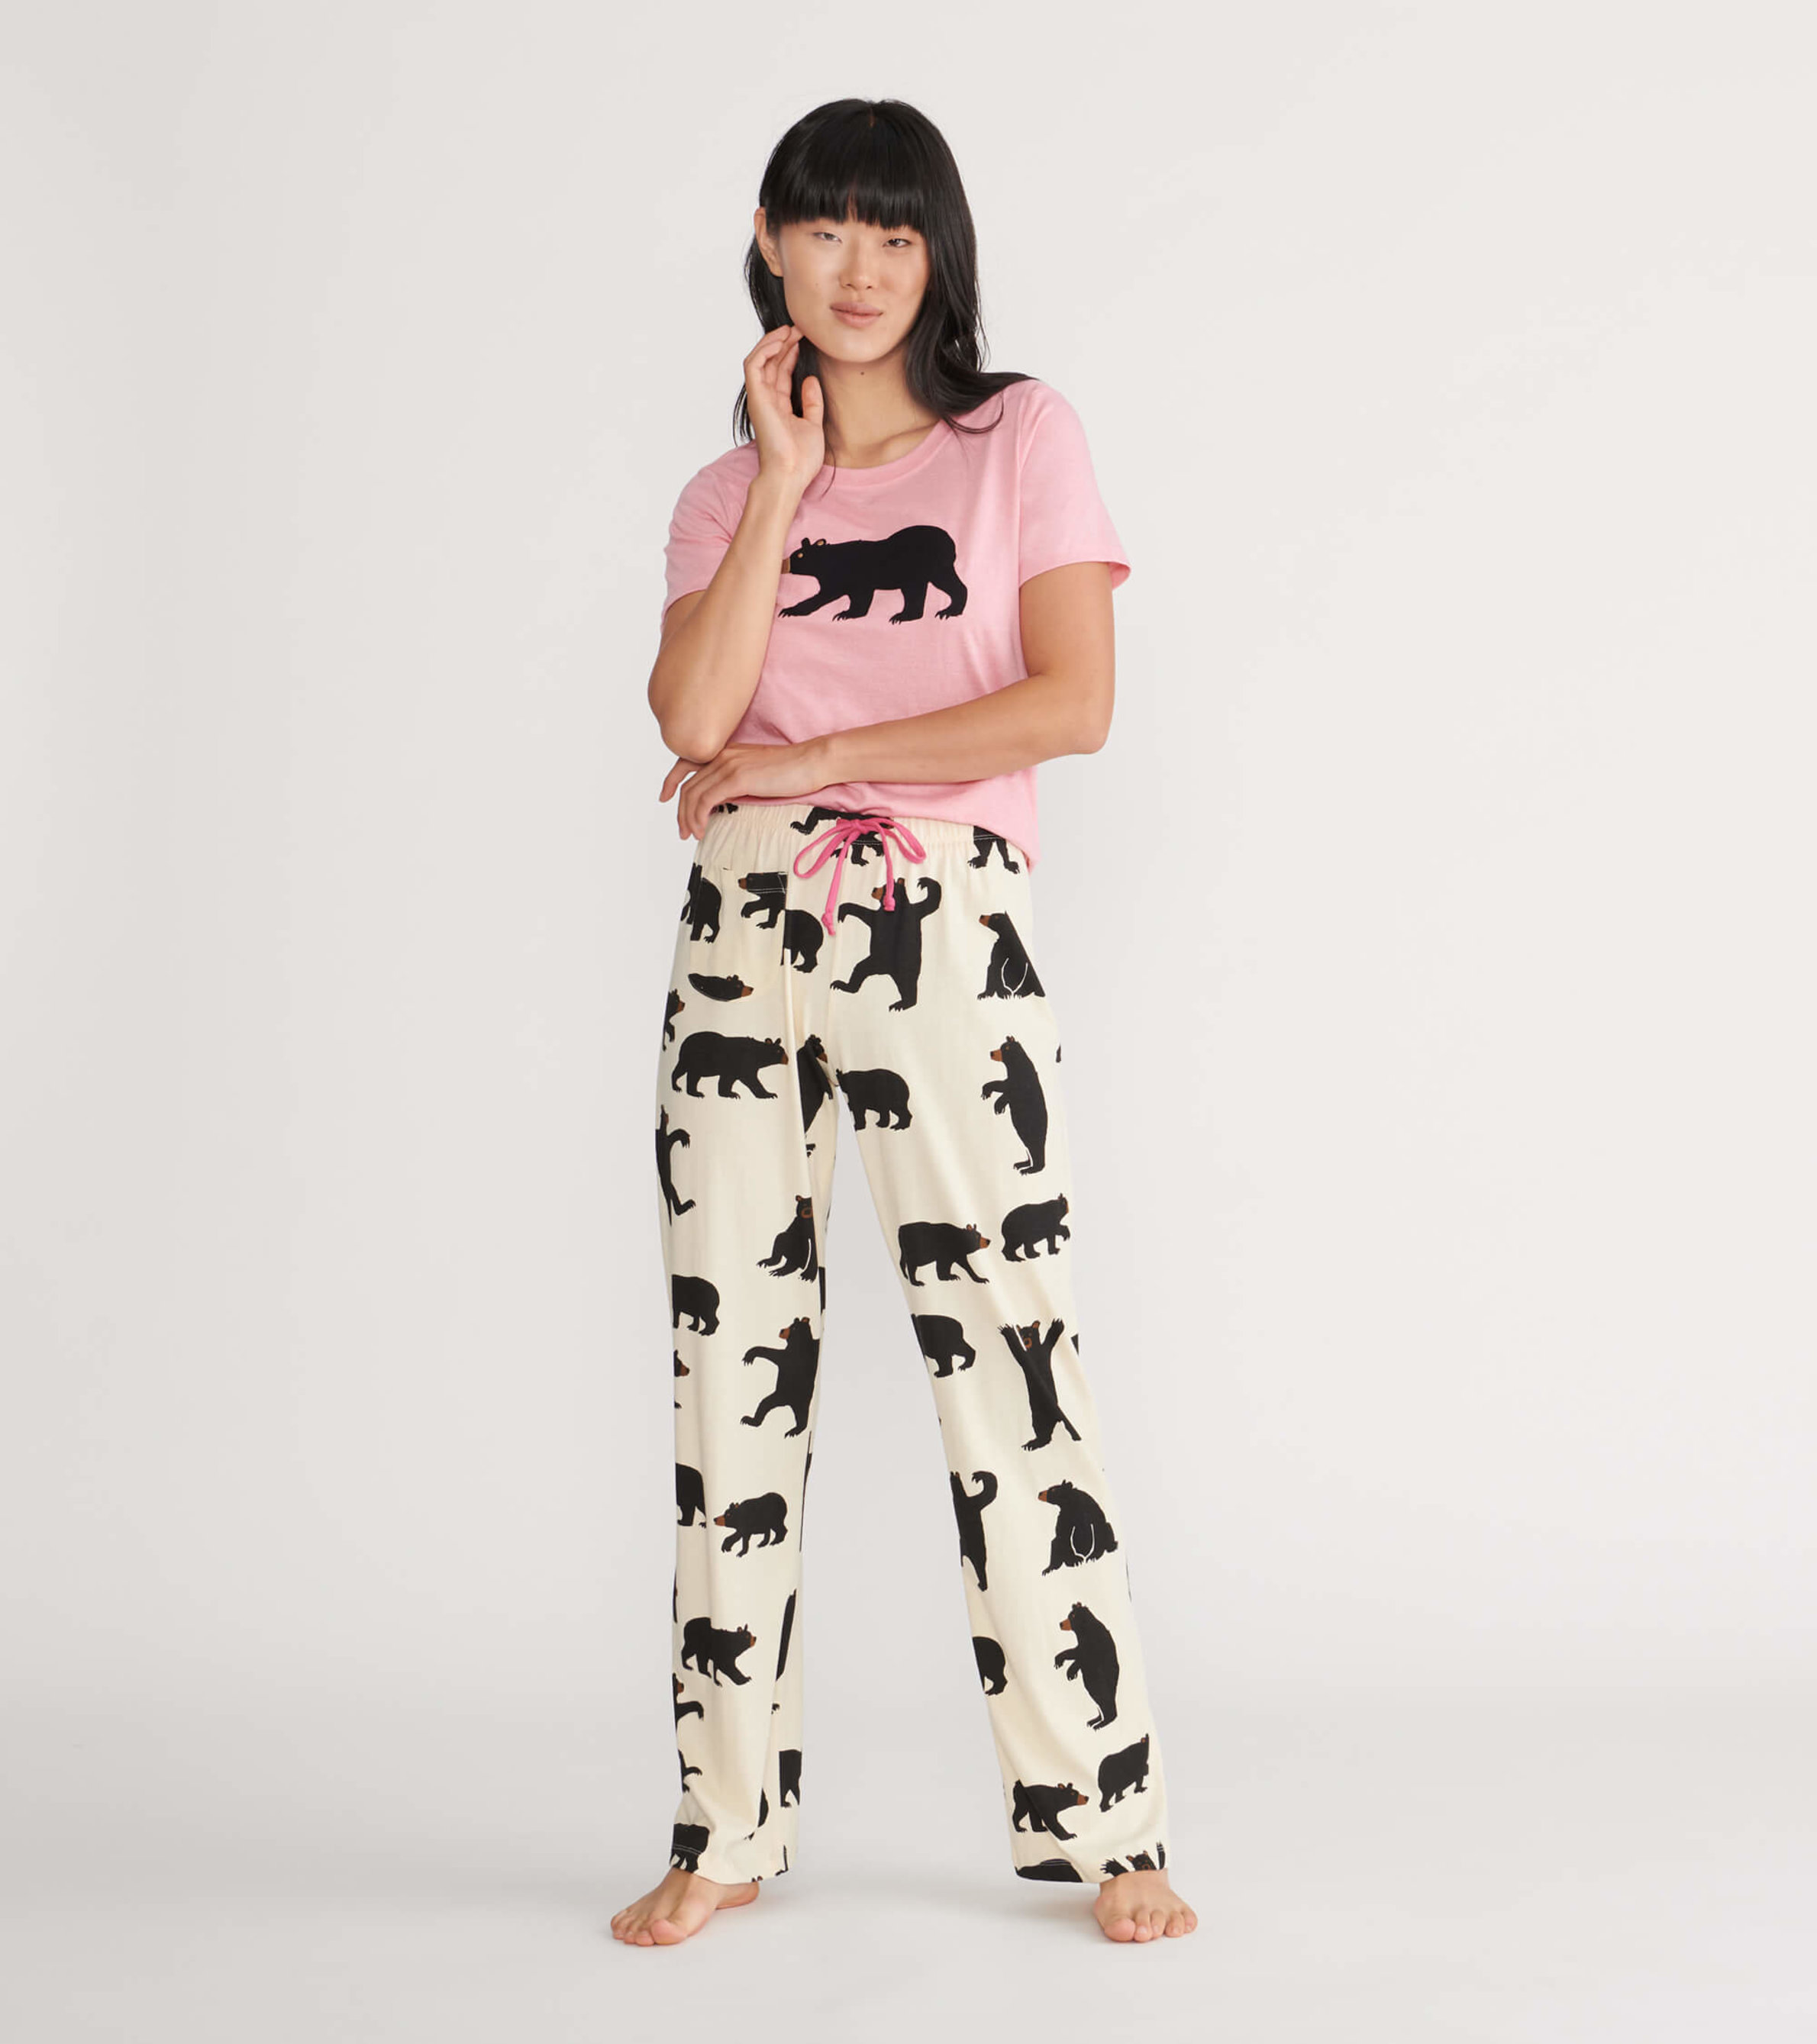 Classic Bears Women's Tee and Shorts Pajama Separates - Little